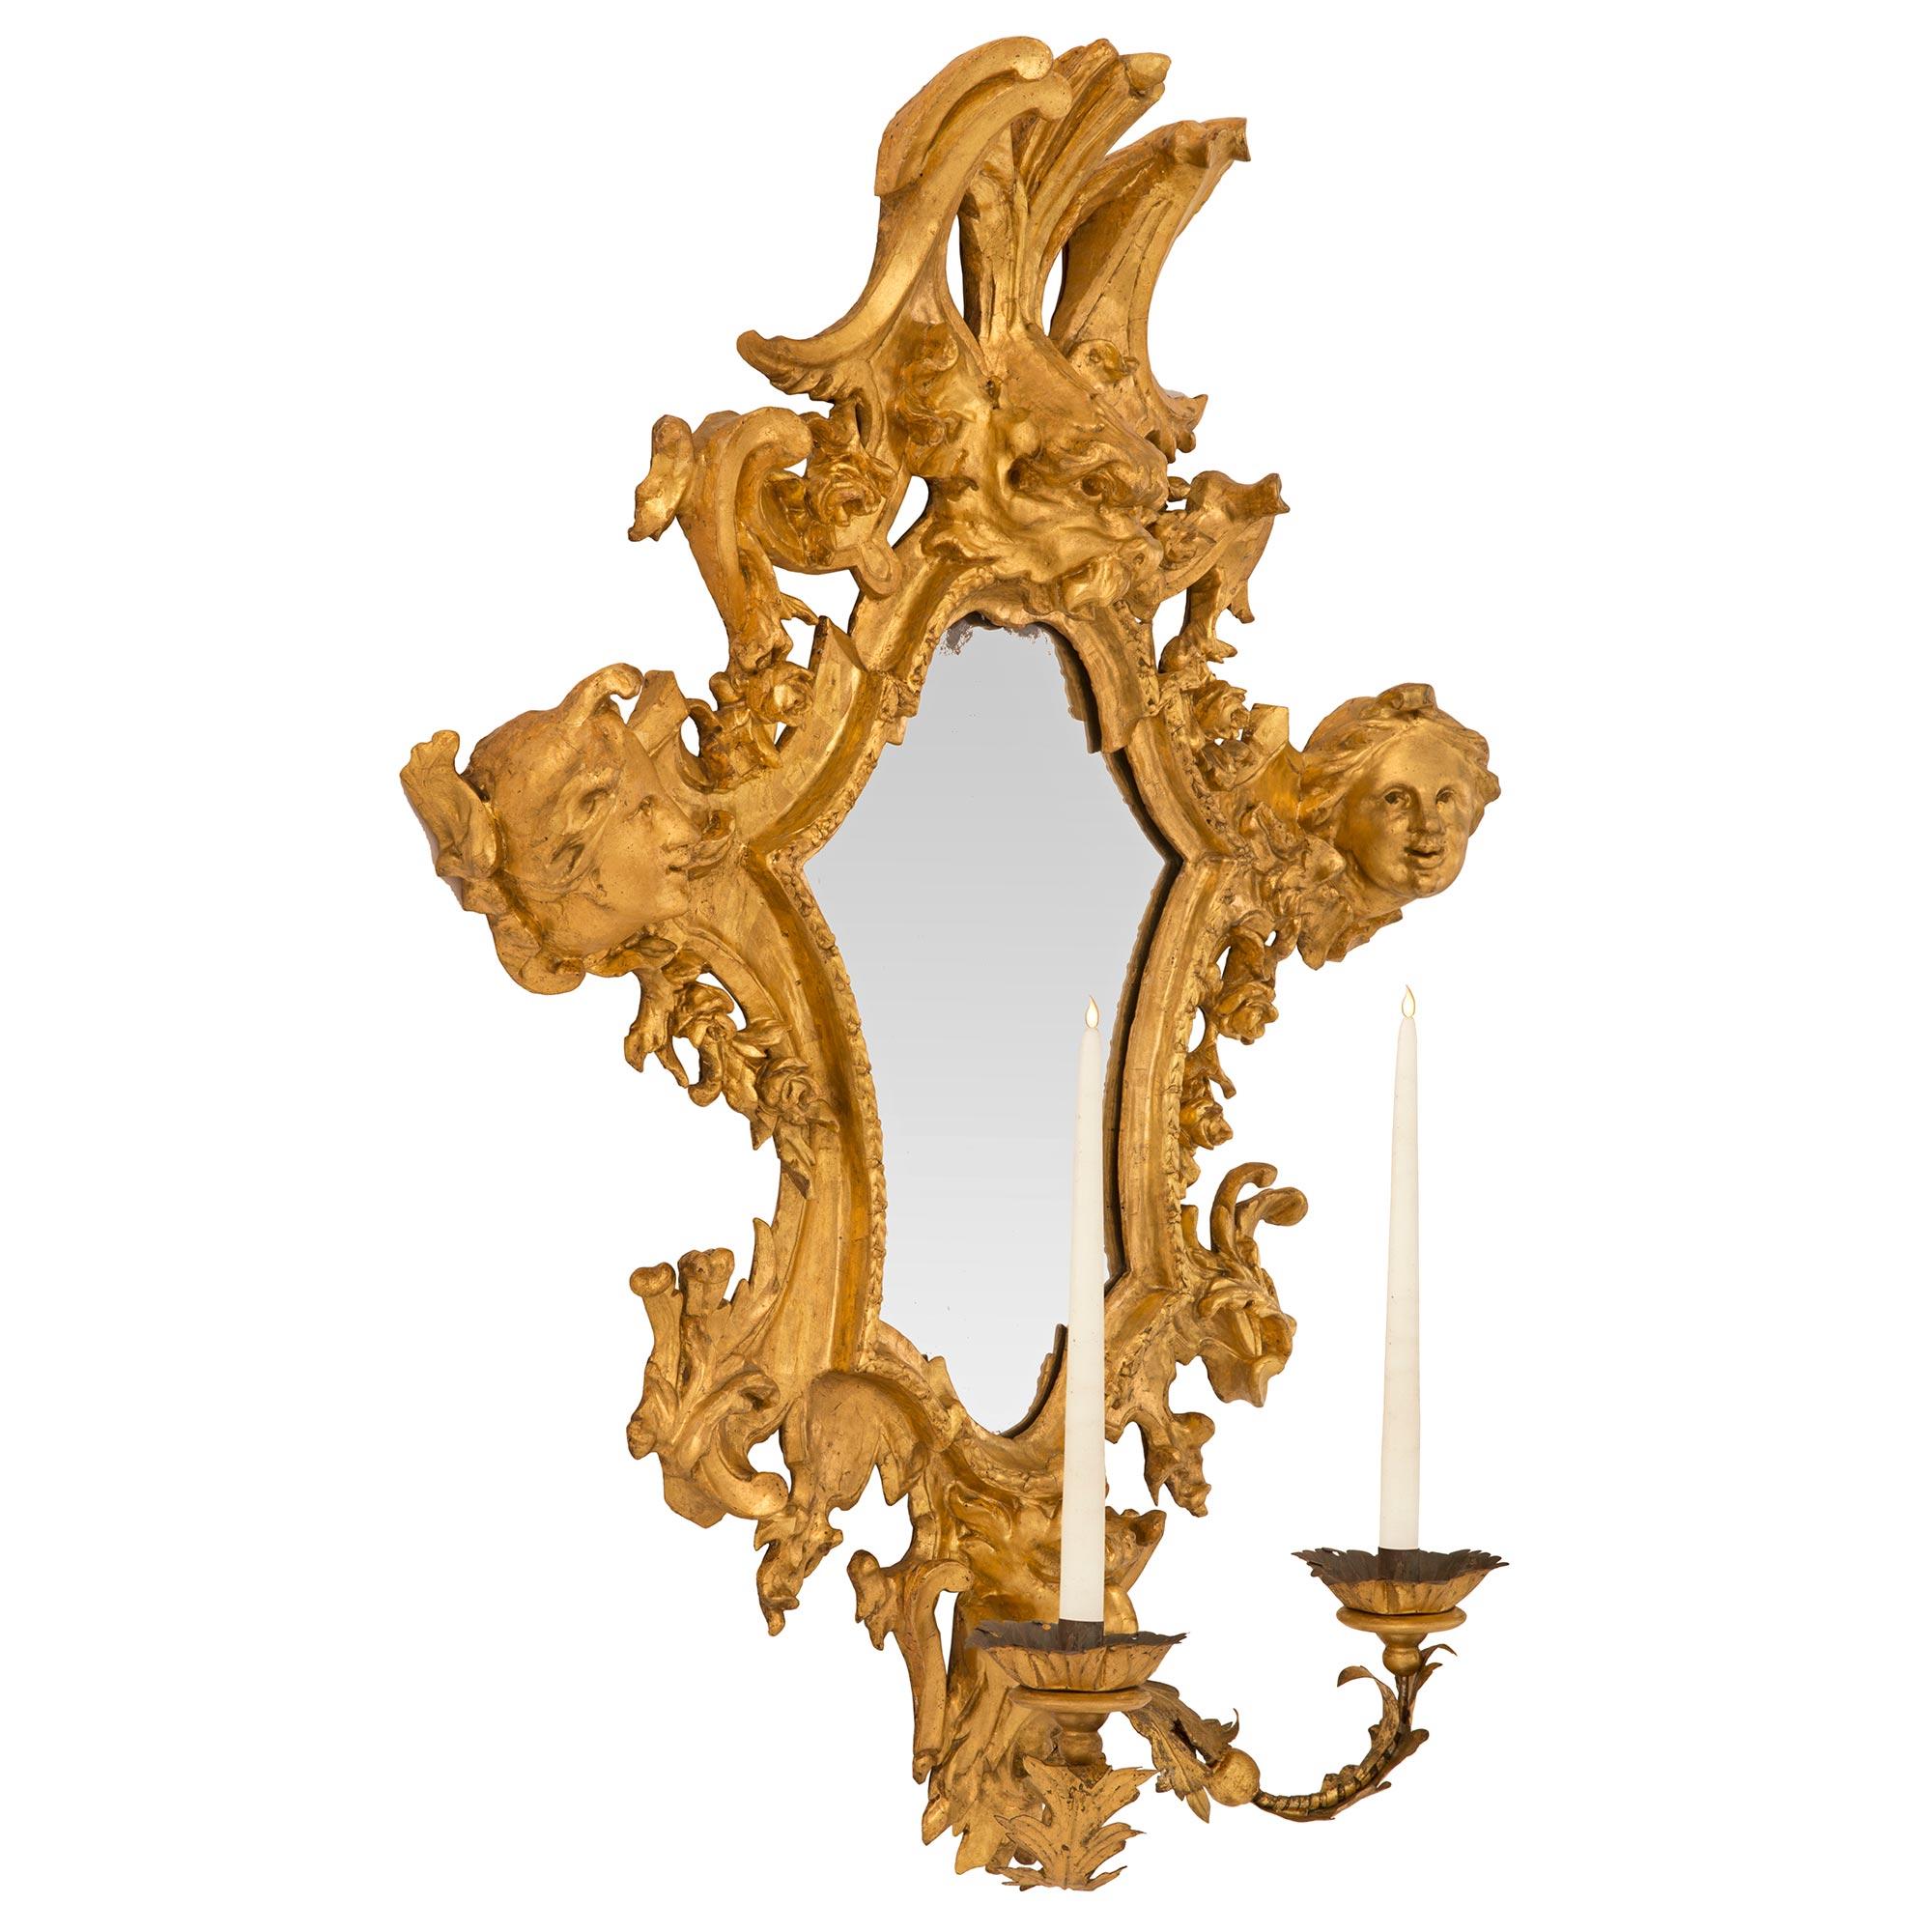 A stunning and rare pair of Italian 17th century Baroque period giltwood Roman mirrored sconces. Each two arm sconce retains its original mirror backplate framed within an elegant and most decorative mottled border and richly carved wrap around